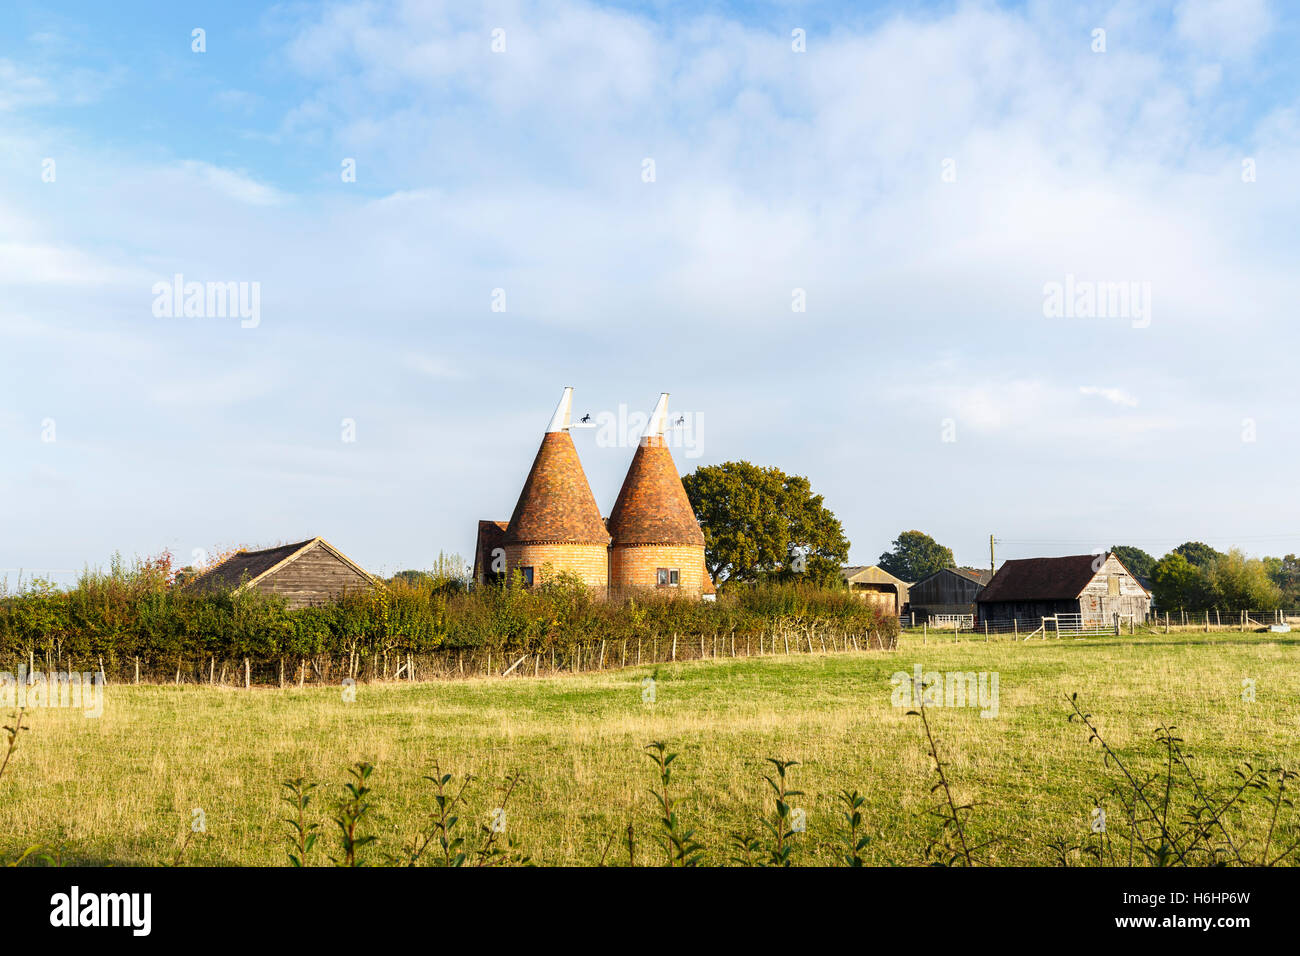 Two traditional style oast houses converted to residential use, Biddenden in rural Kent on the Kentish Weald, south-east England Stock Photo